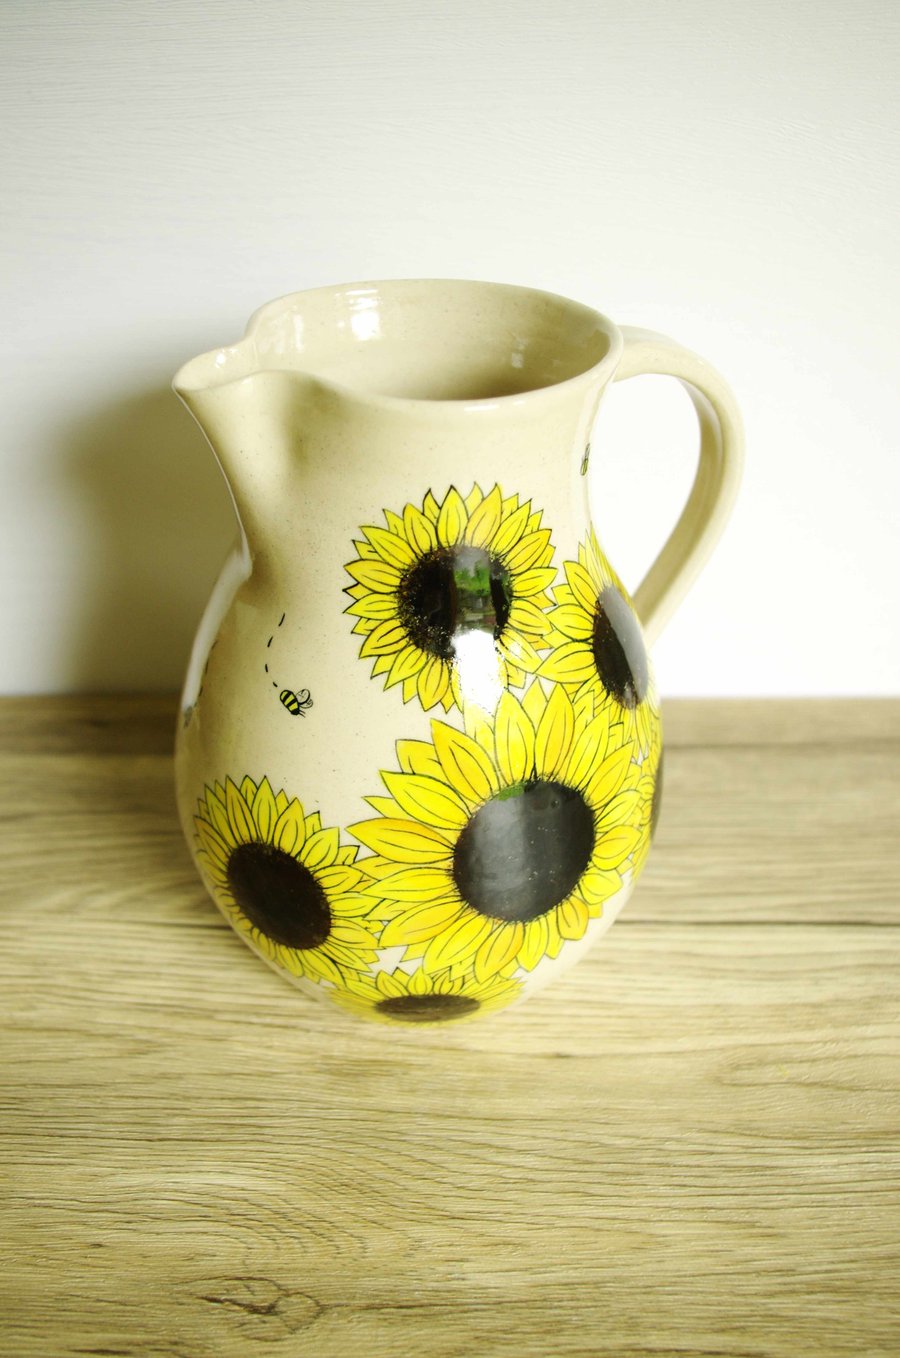 Large Jug - Sunflower and Bees